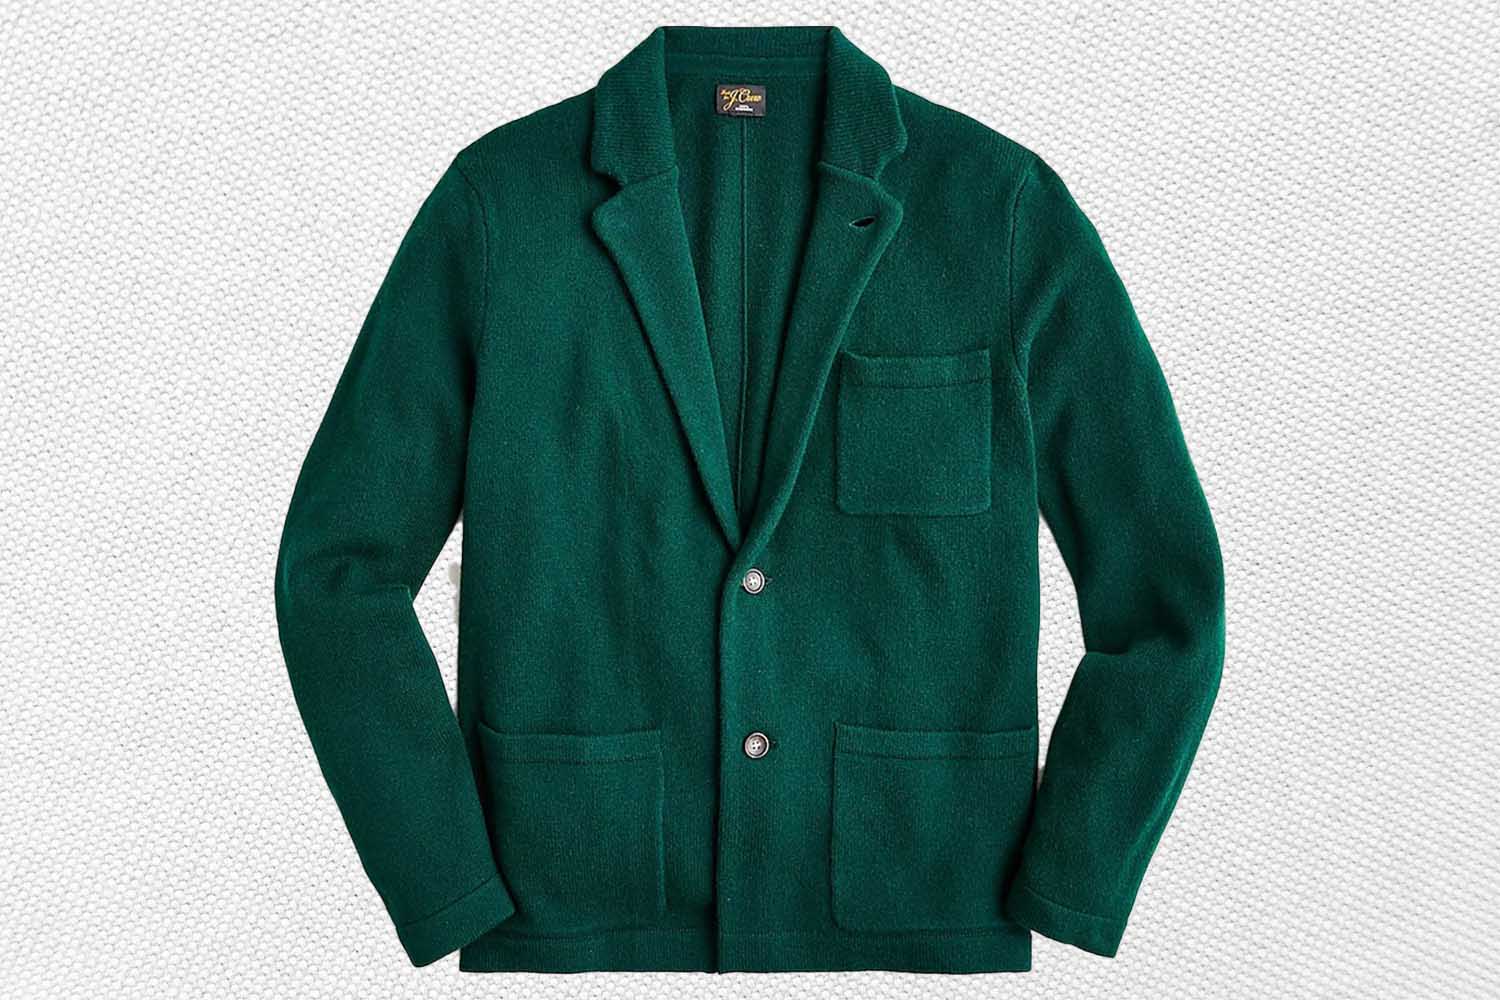 a green cashmere sweater blazer from J.Crew on a grey background